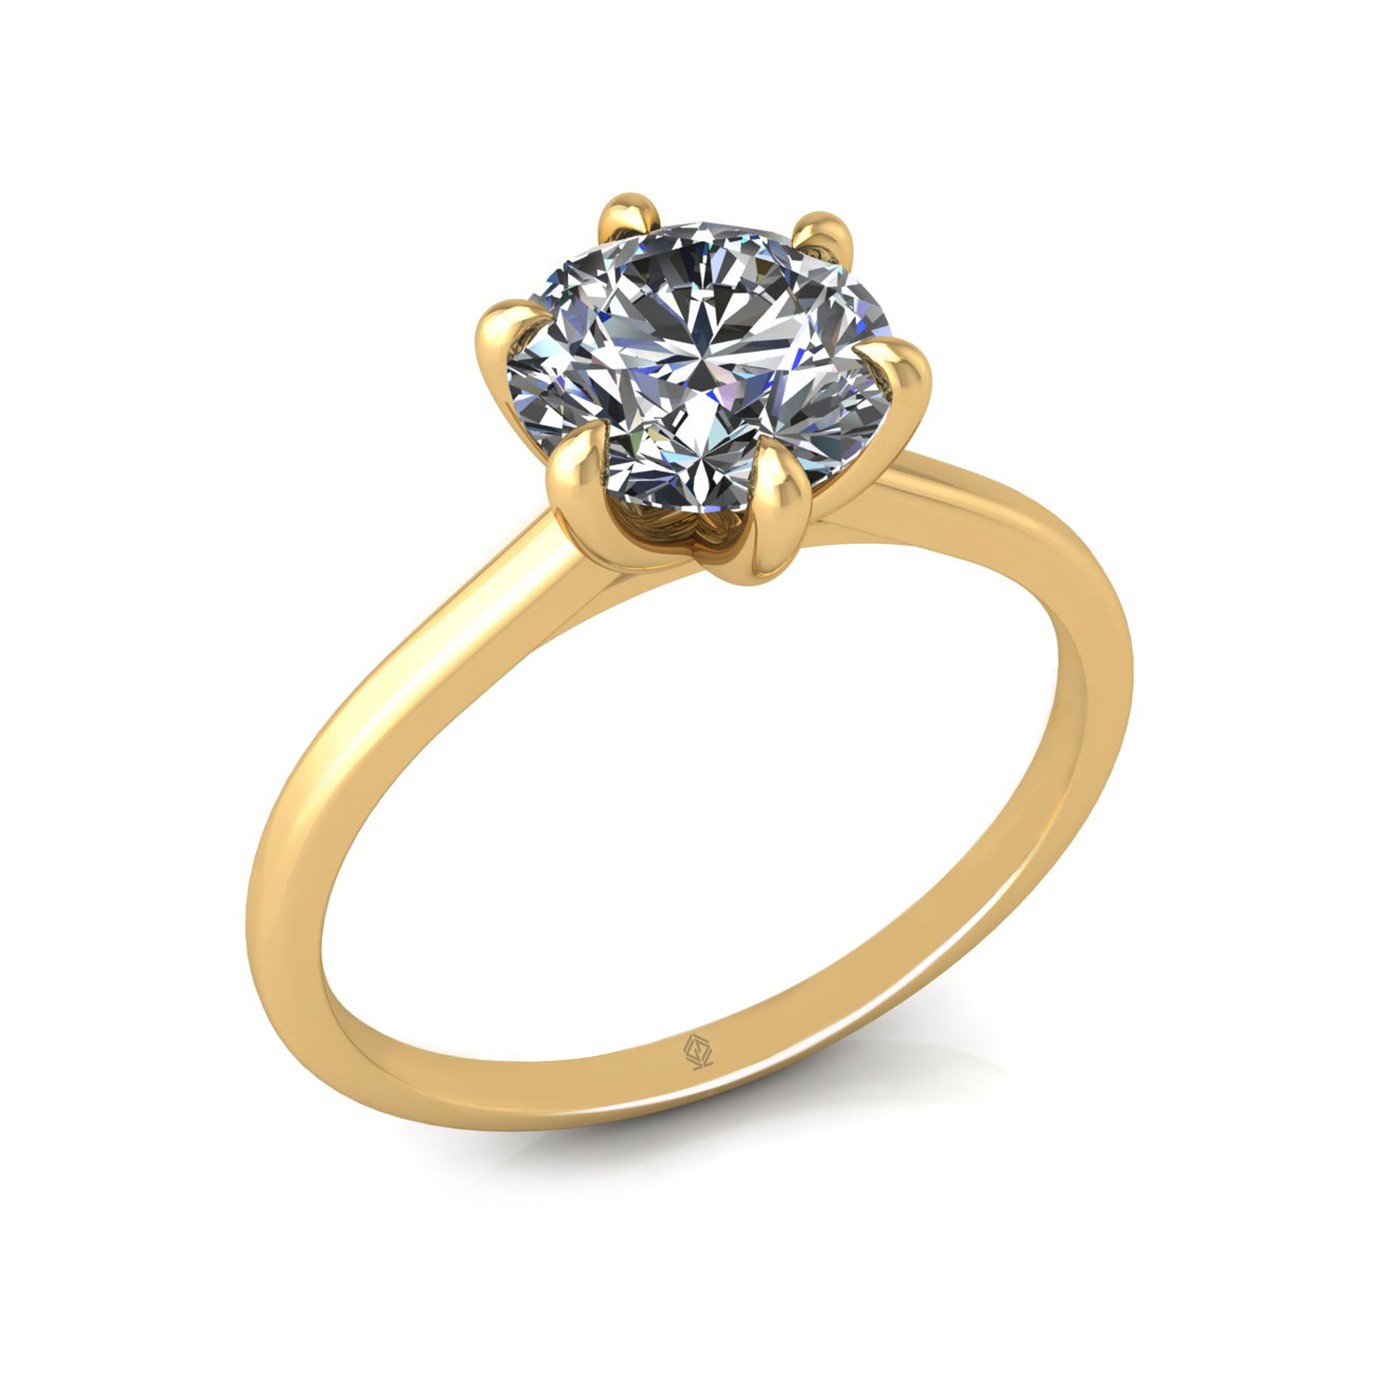 18k yellow gold 1,50 ct 6 prongs solitaire round cut diamond engagement ring with whisper thin band